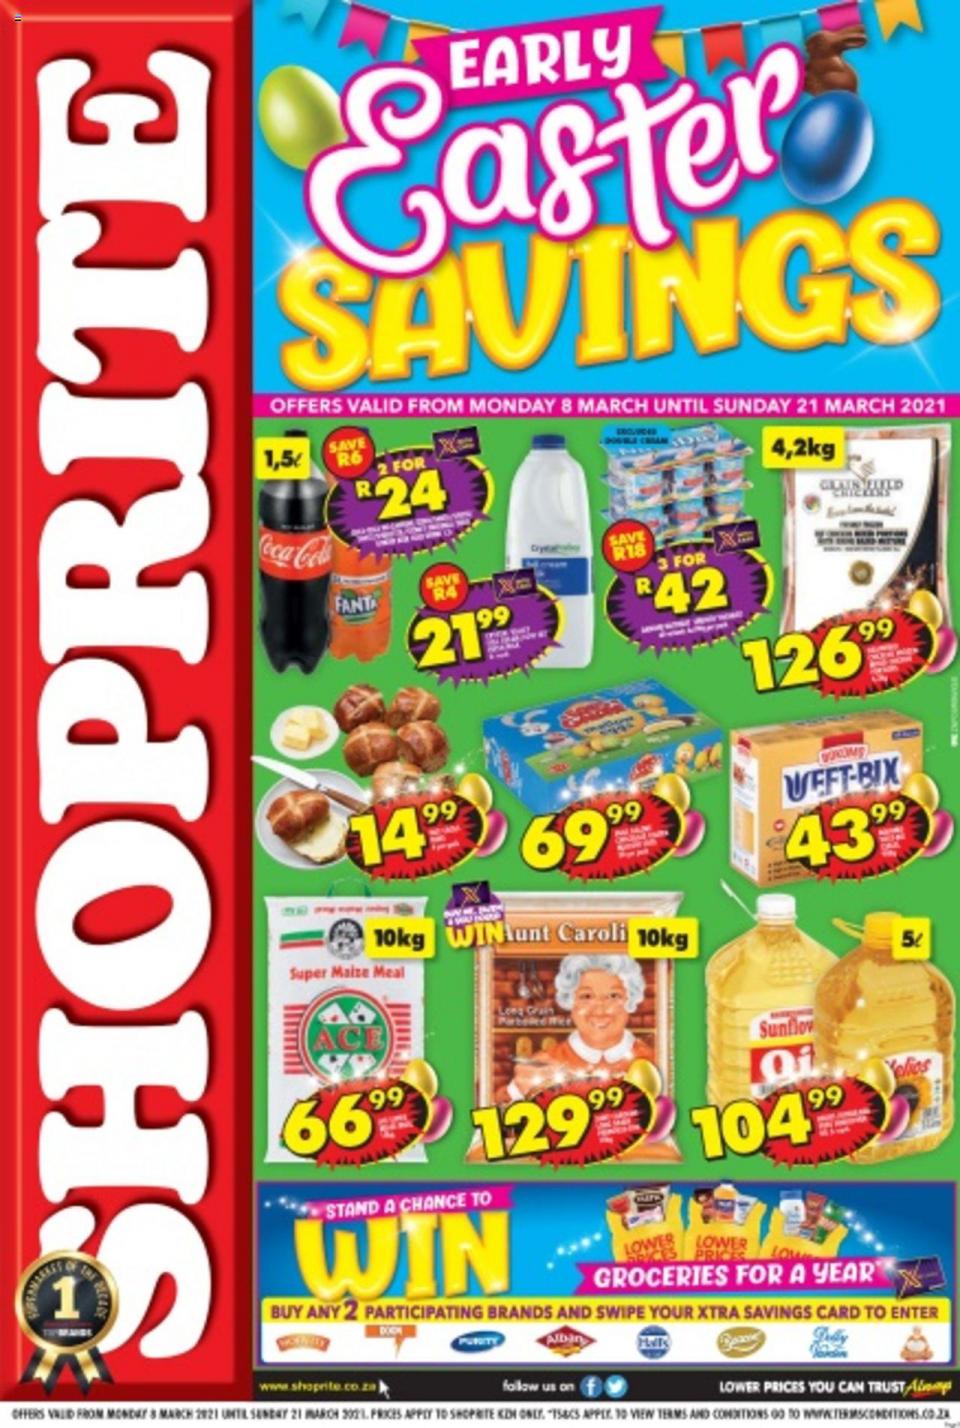 Shoprite Specials Early Easter Savings 8 March 2021